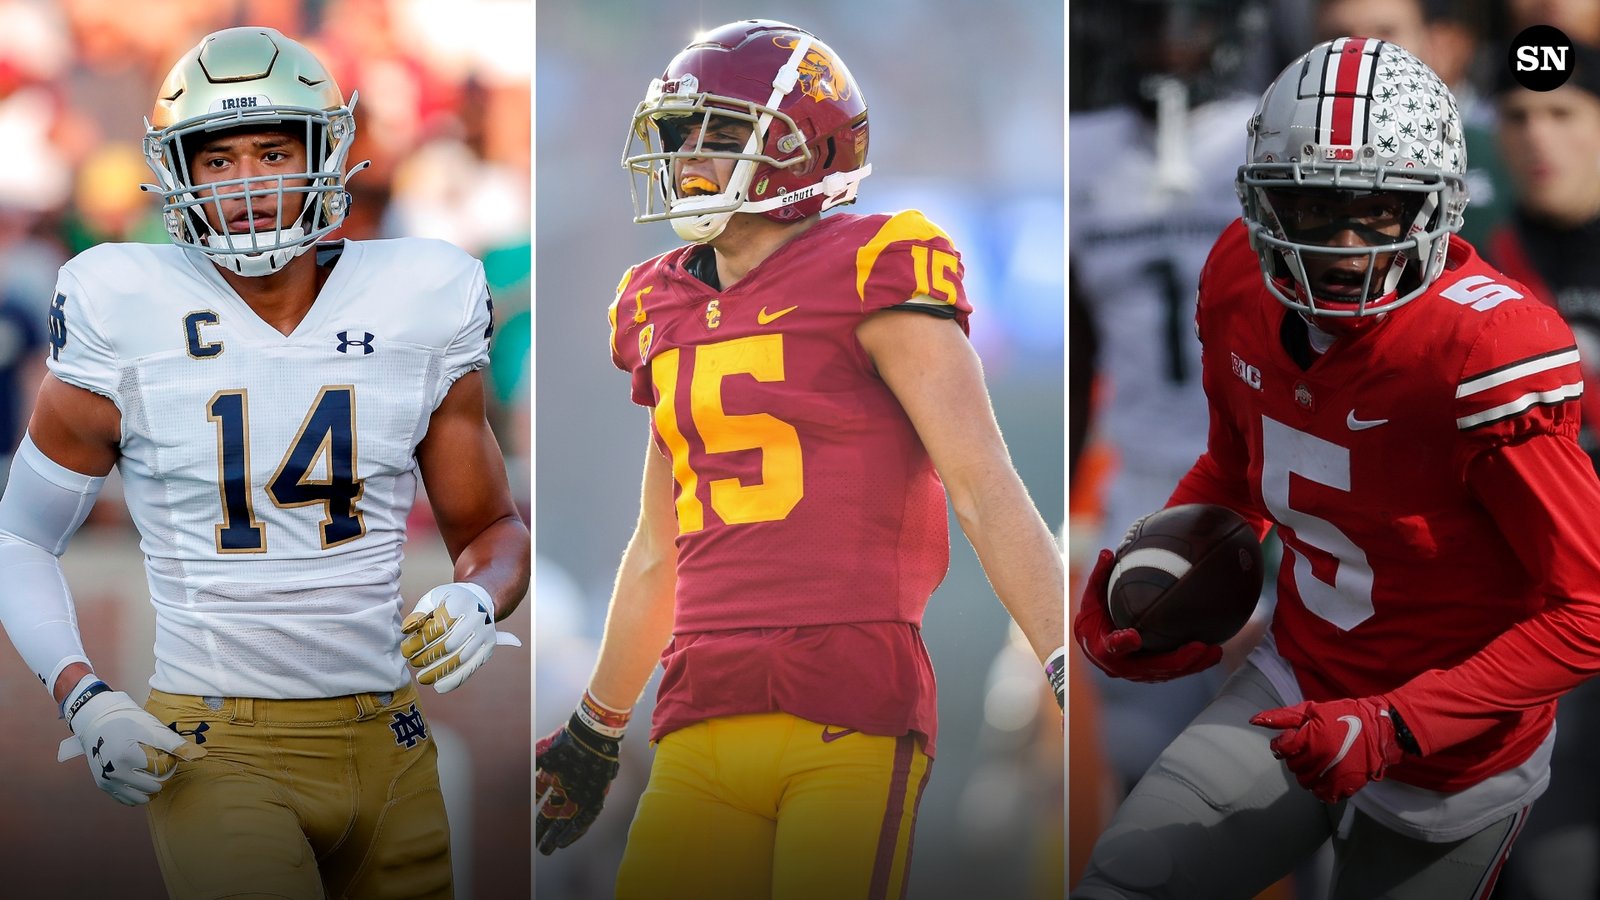 NFL Draft history: Check out the schools with maximum NFL draftees